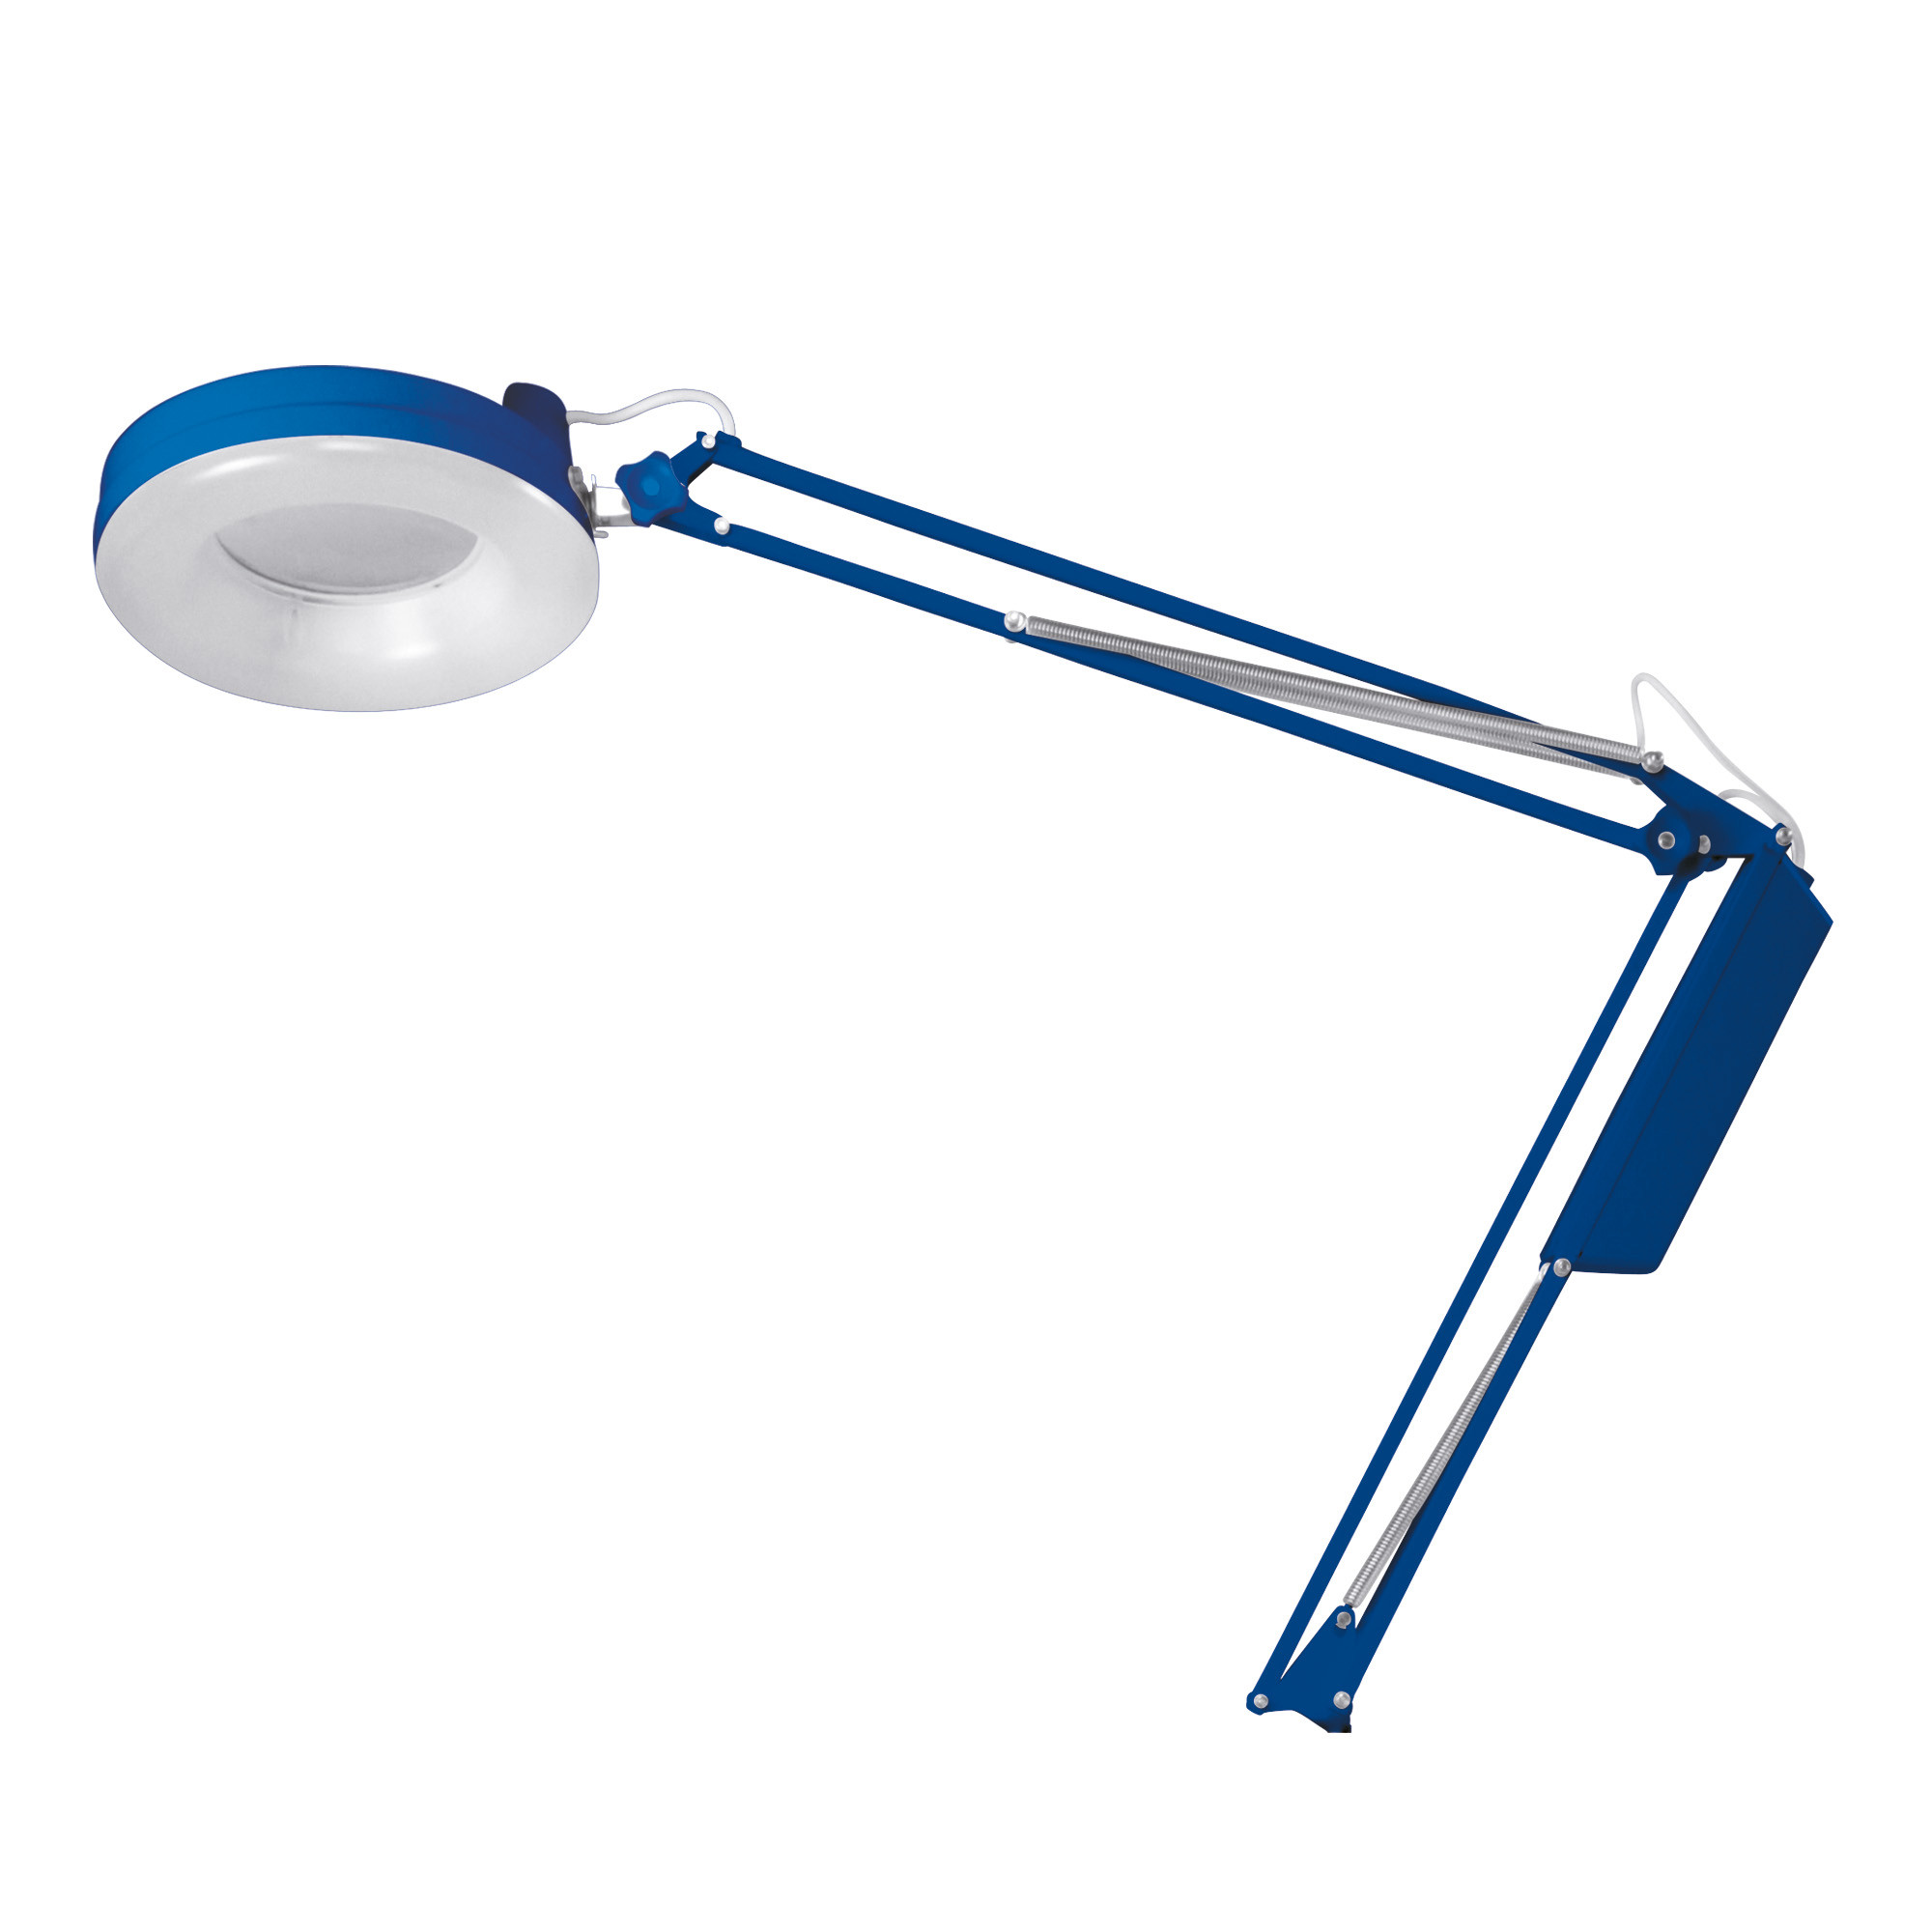 Afma lamp with neon light and 3-diopter blue magnifier